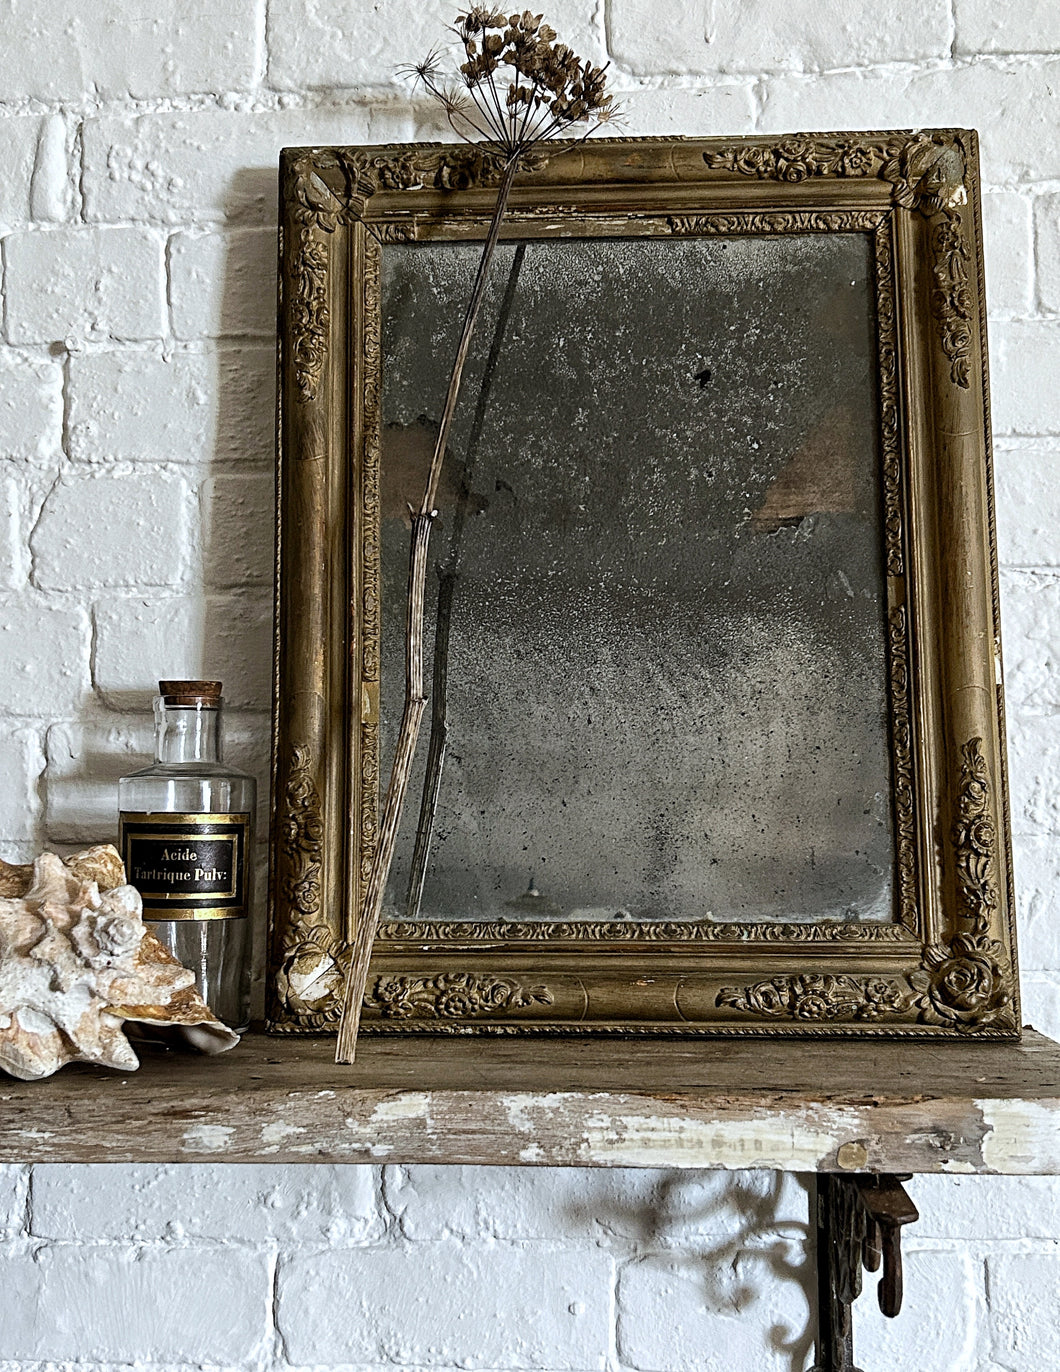 A French Antique plaster gilded gold mirror with foxed distressed plate glass